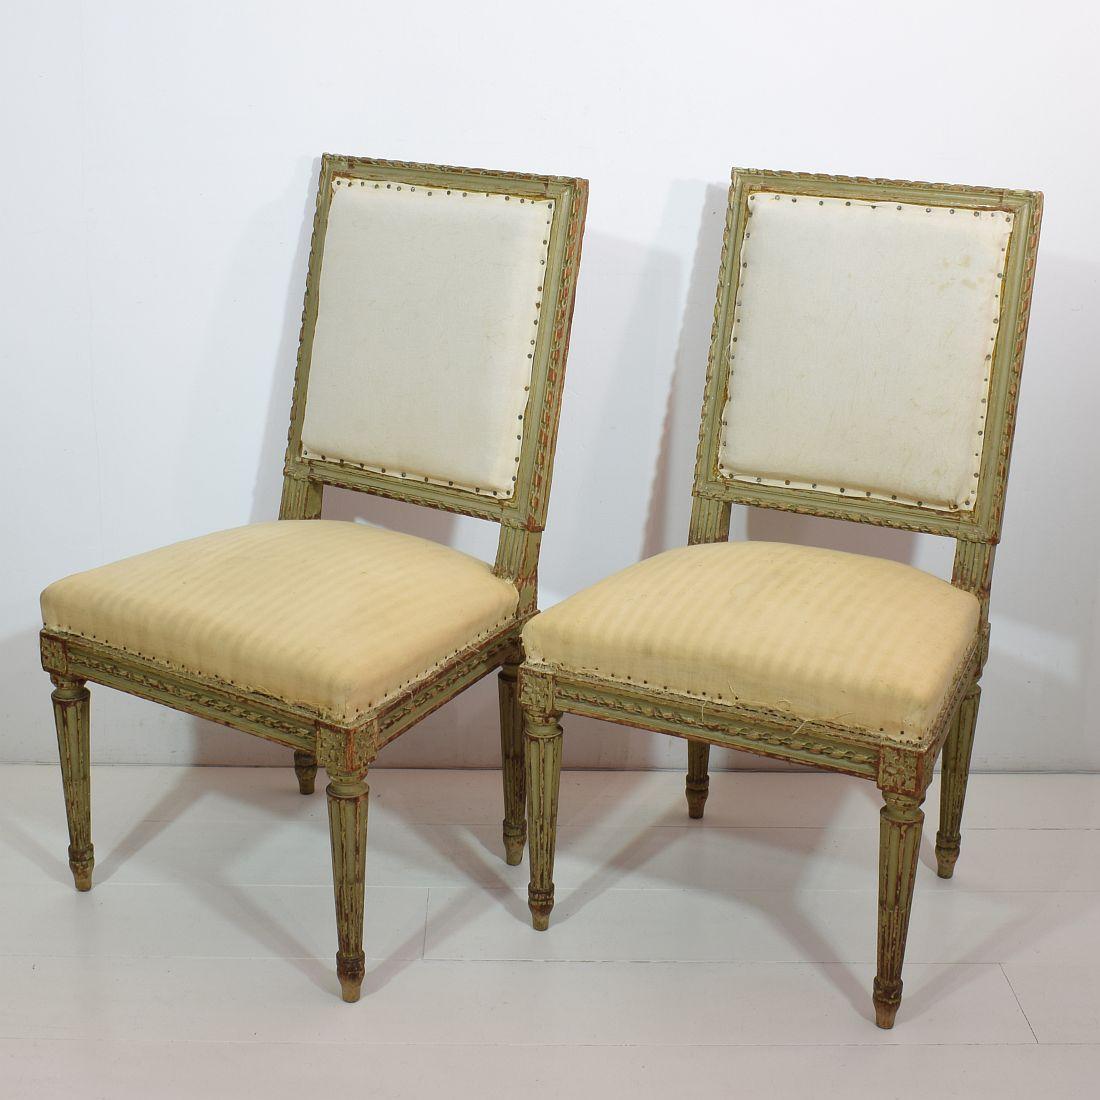 Carved Pair of 19th Century French Painted Louis XVI Style Side Chairs